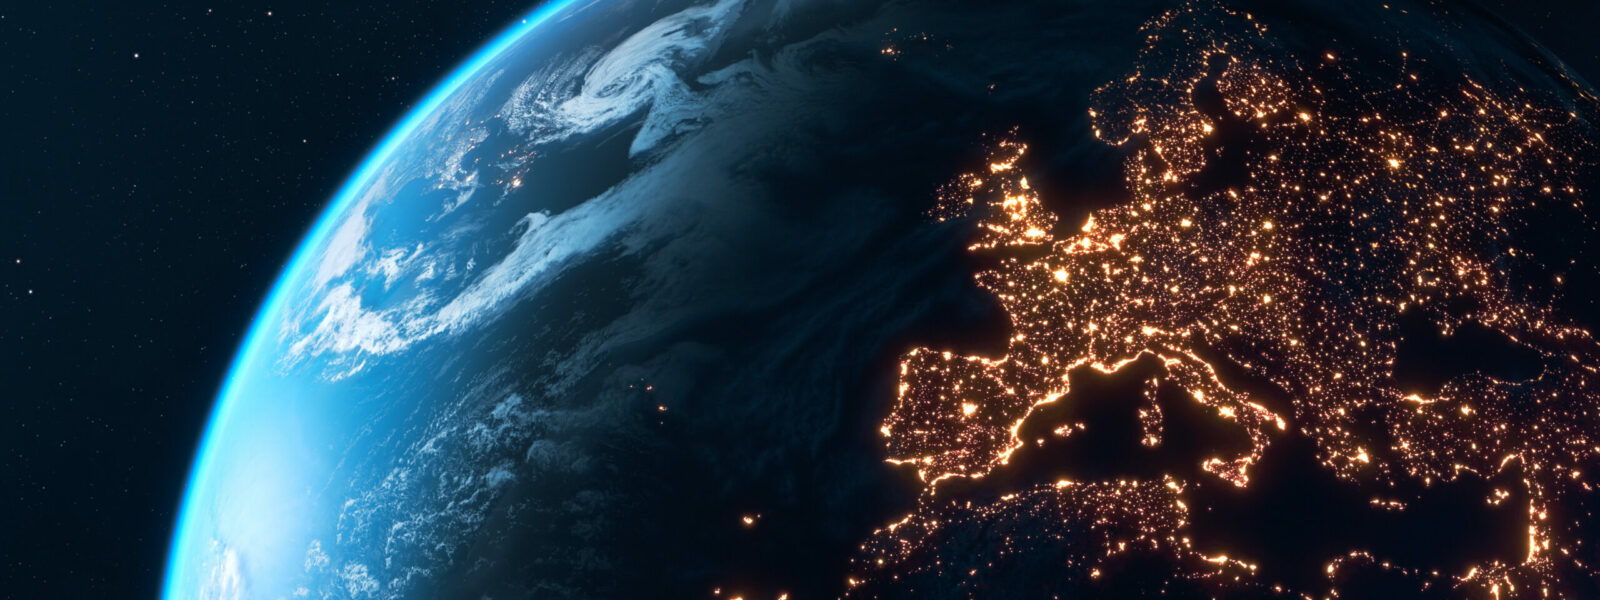 Planet Earth At Night – City Lights of Europe Glowing In The Dark